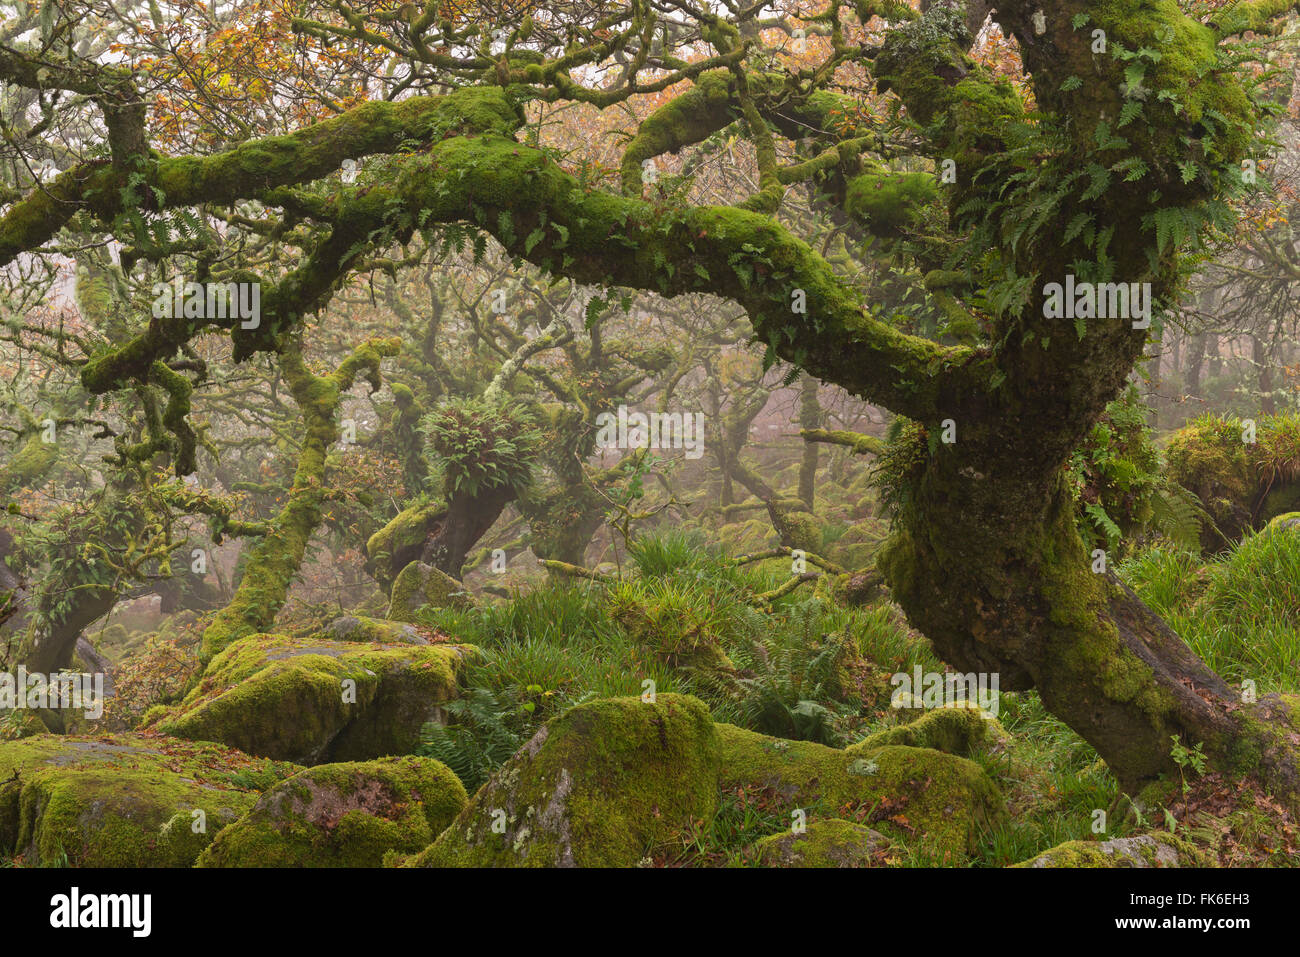 Stunted oak trees in the creepy and mysterious Wistman's Wood, Dartmoor National Park, Devon, England, United Kingdom, Europe Stock Photo